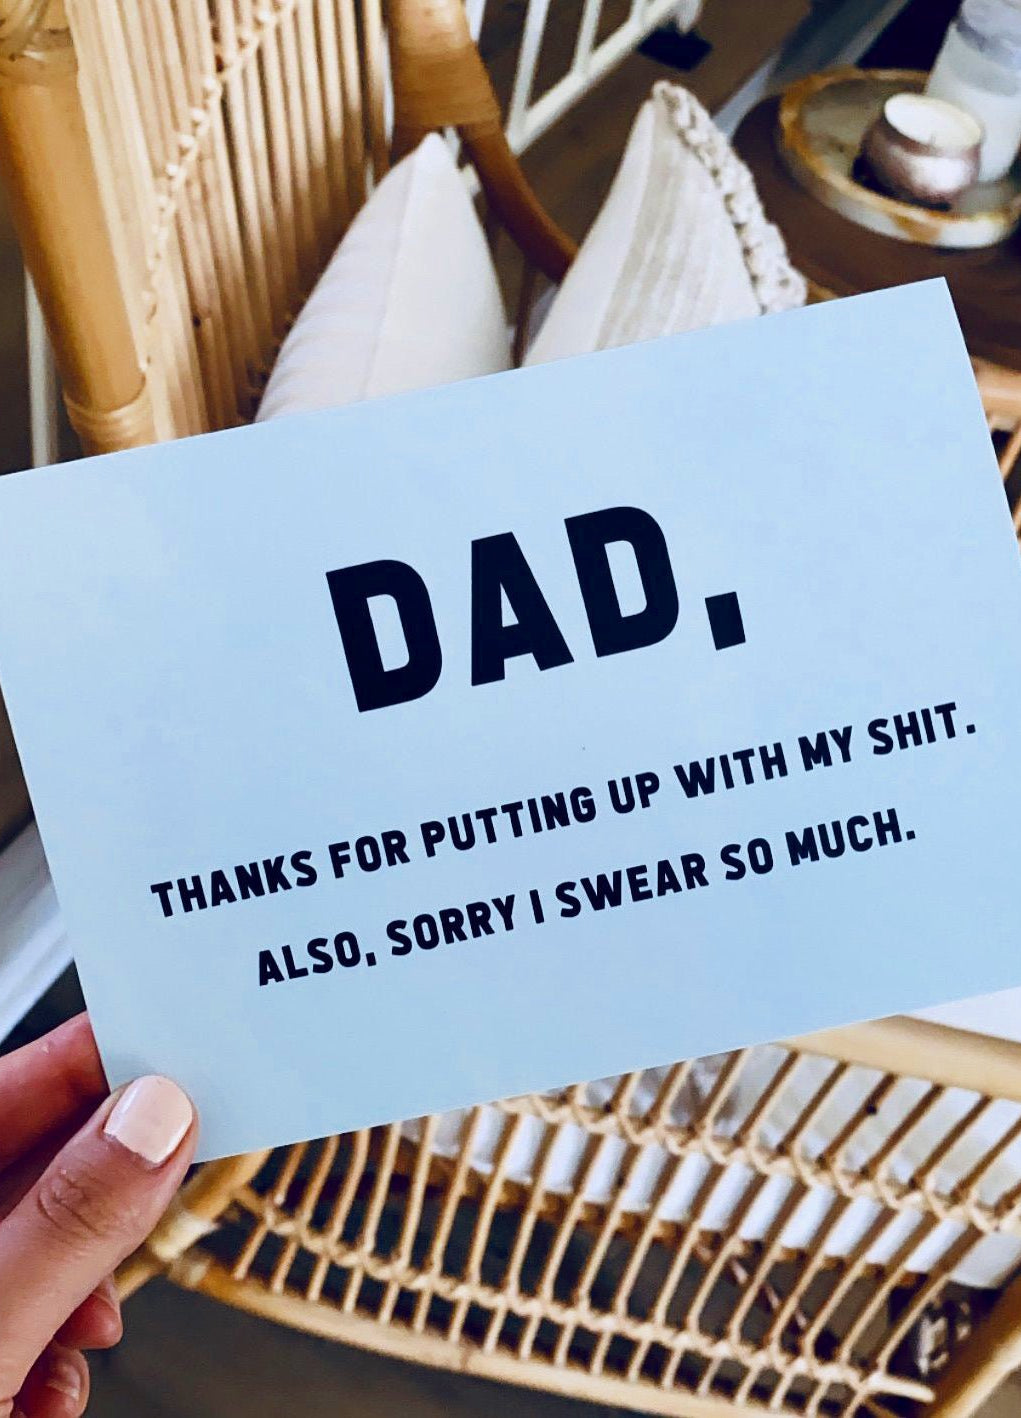 Dad Thanks For Putting Up With My Shit Also Sorry I Swear So Much Greeting Card - UntamedEgo LLC.